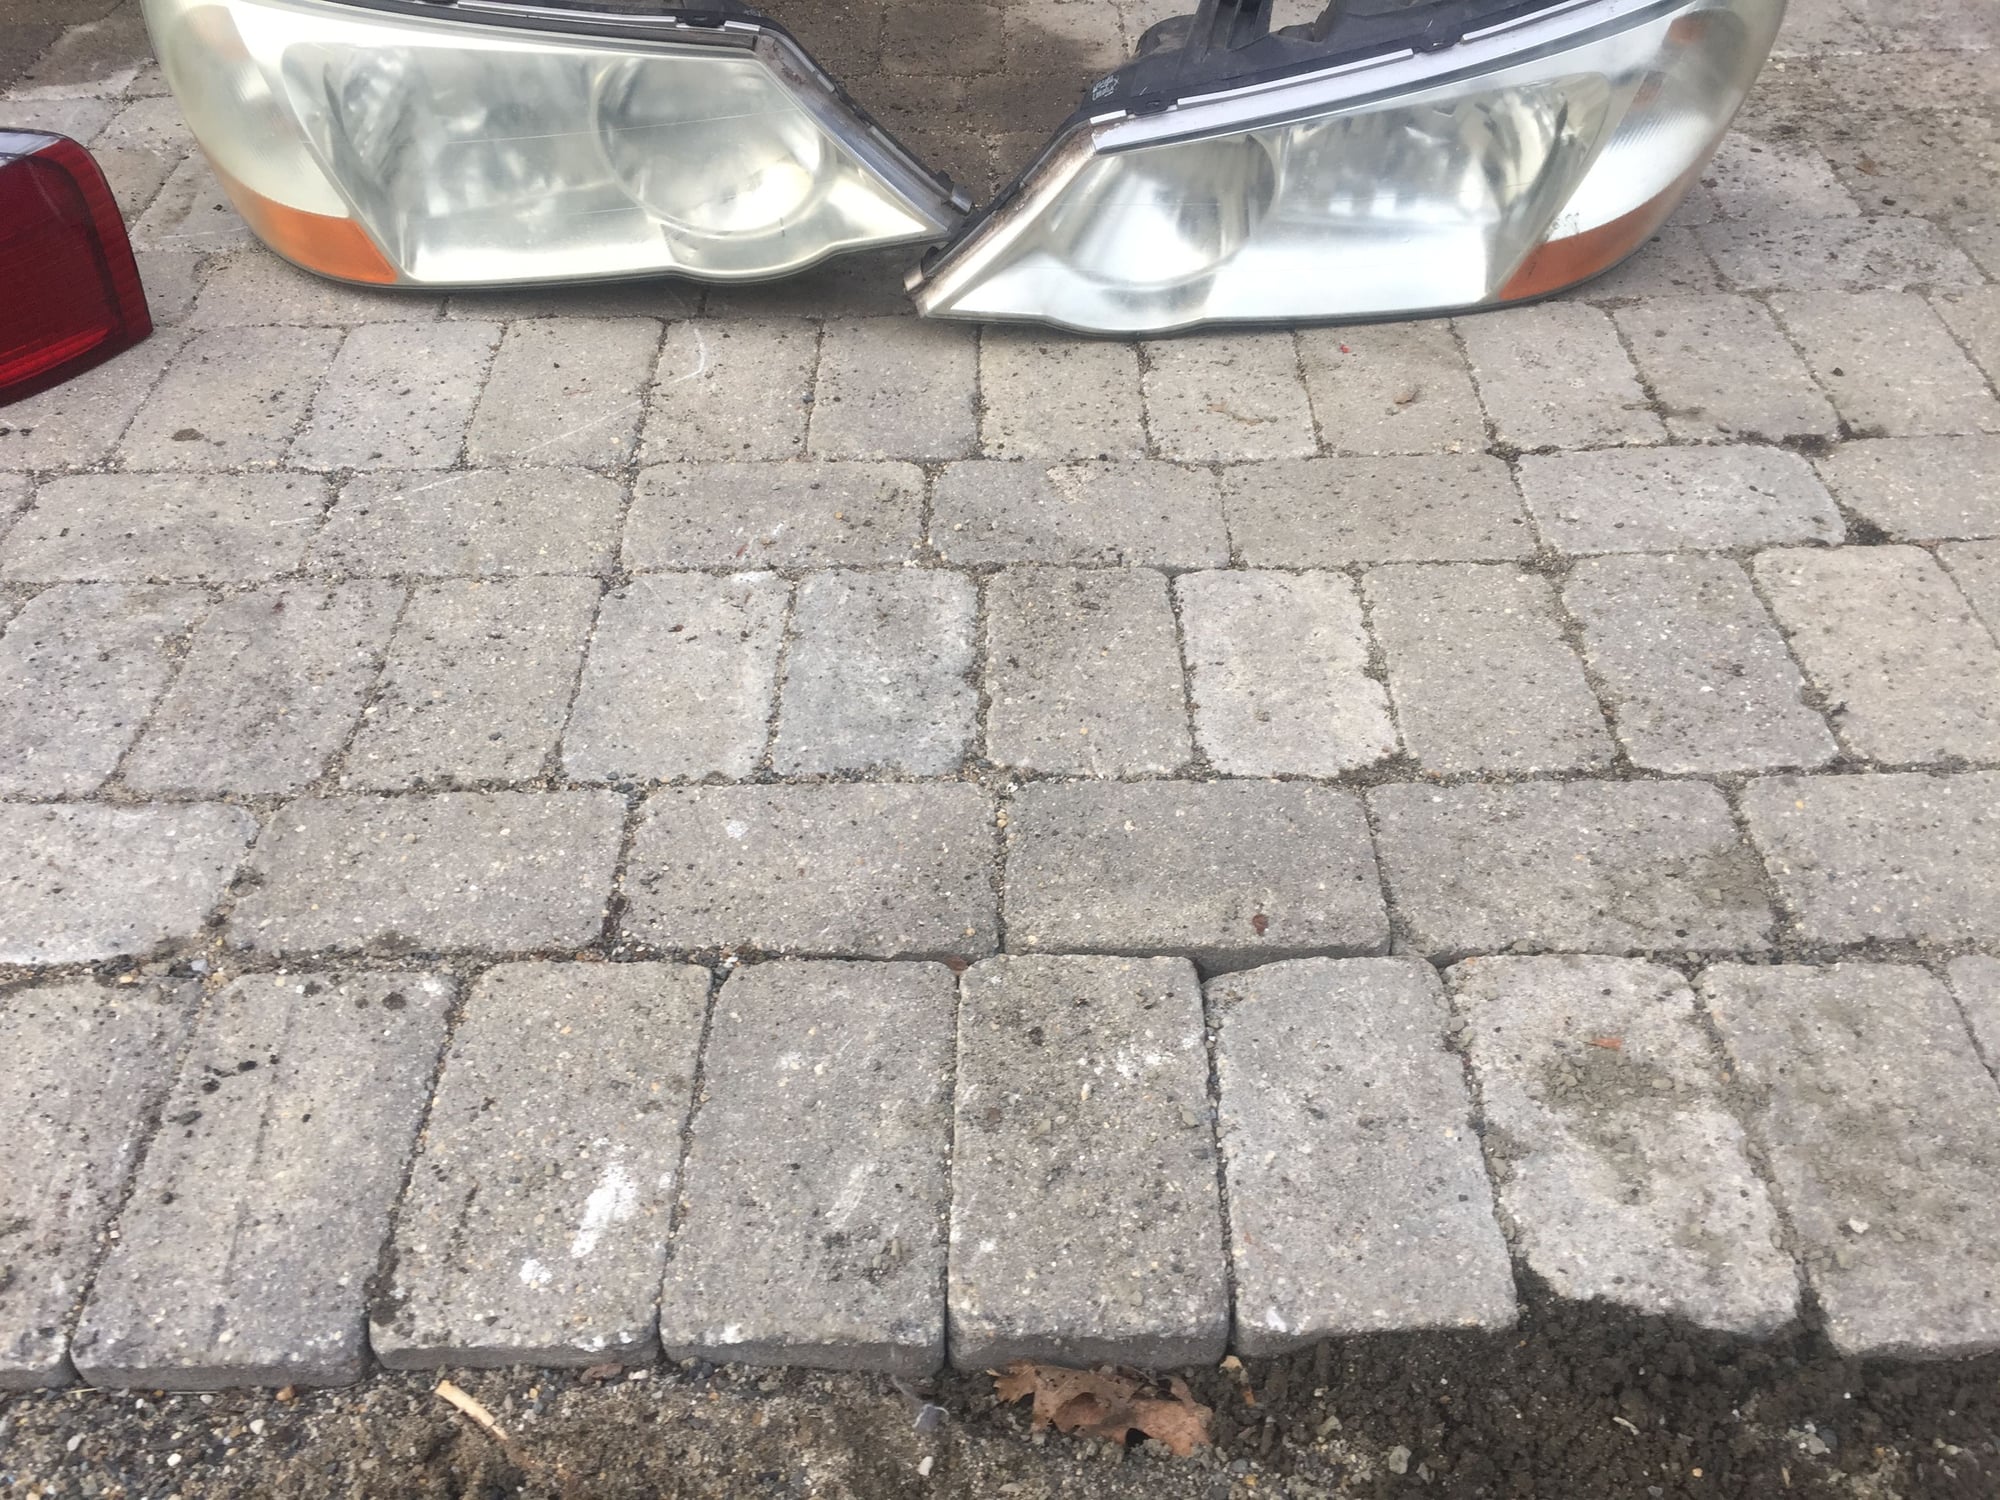 Lights - FS: Acura TL type s 2003 headlights and tailights - Used - 2002 to 2003 Acura TL - 1999 to 2003 Acura TL - Morris, CT 06763, United States